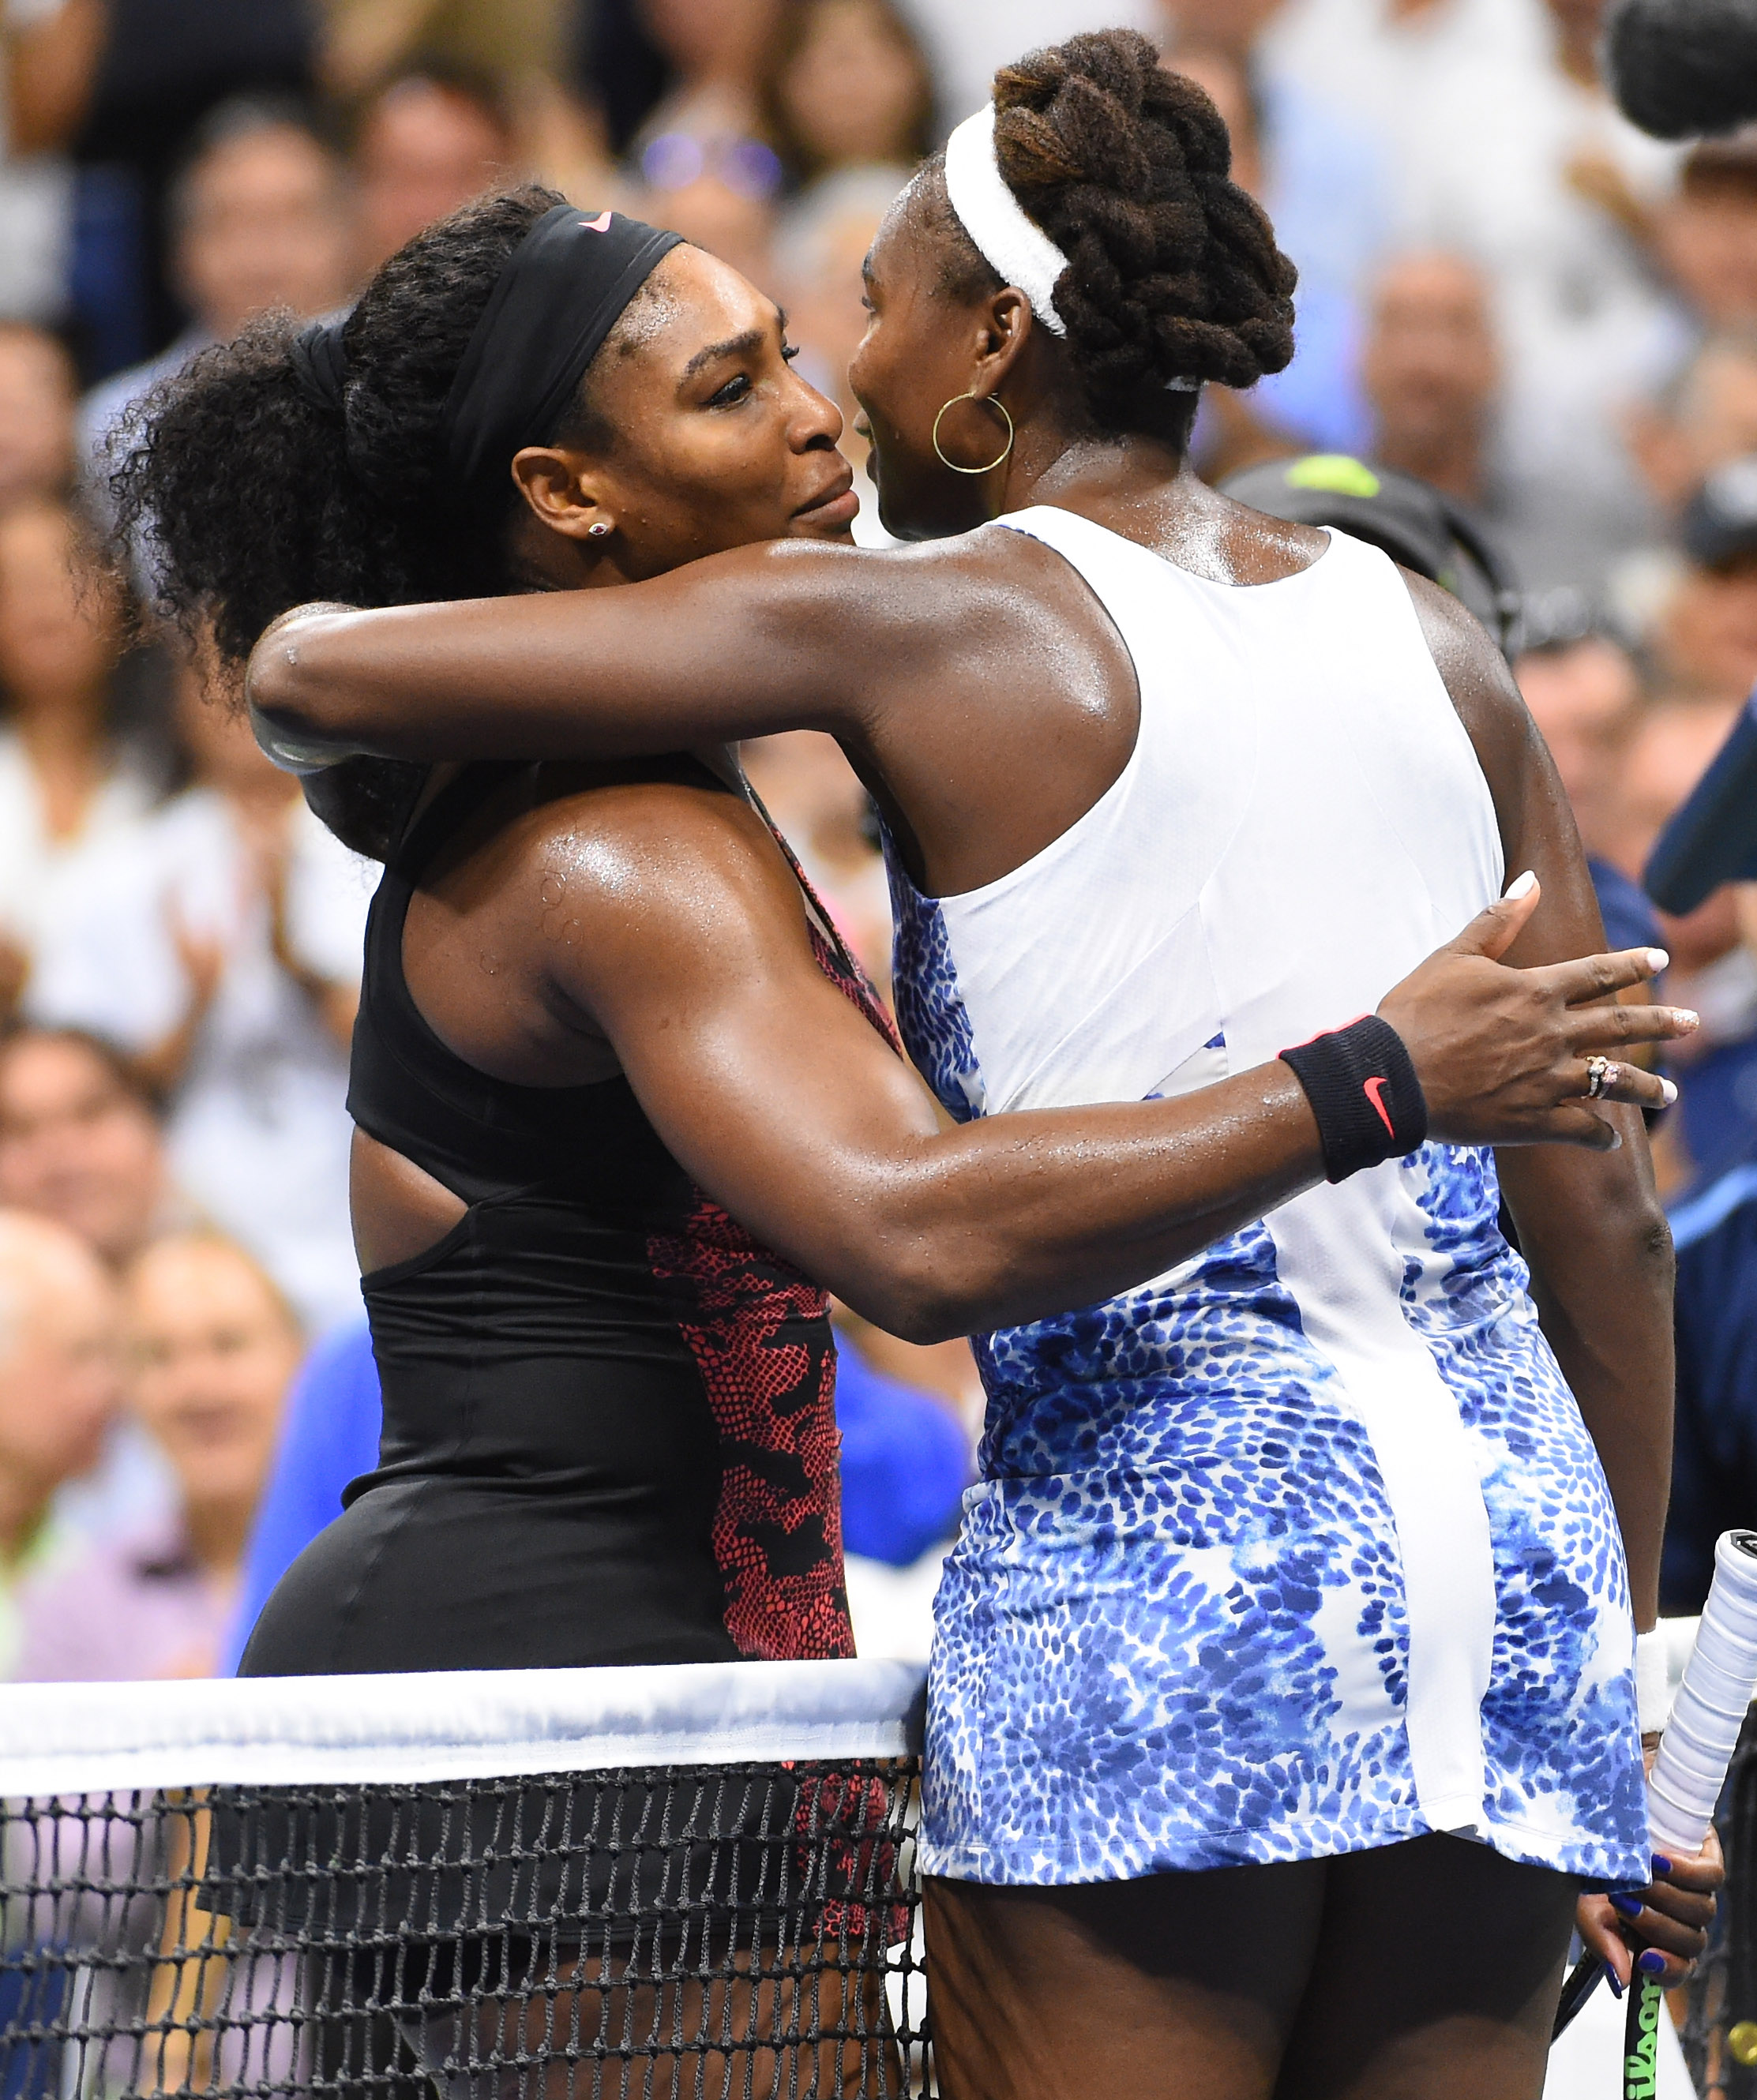 Williams sisters aiming for another Olympic gold in Rio 13newsnow